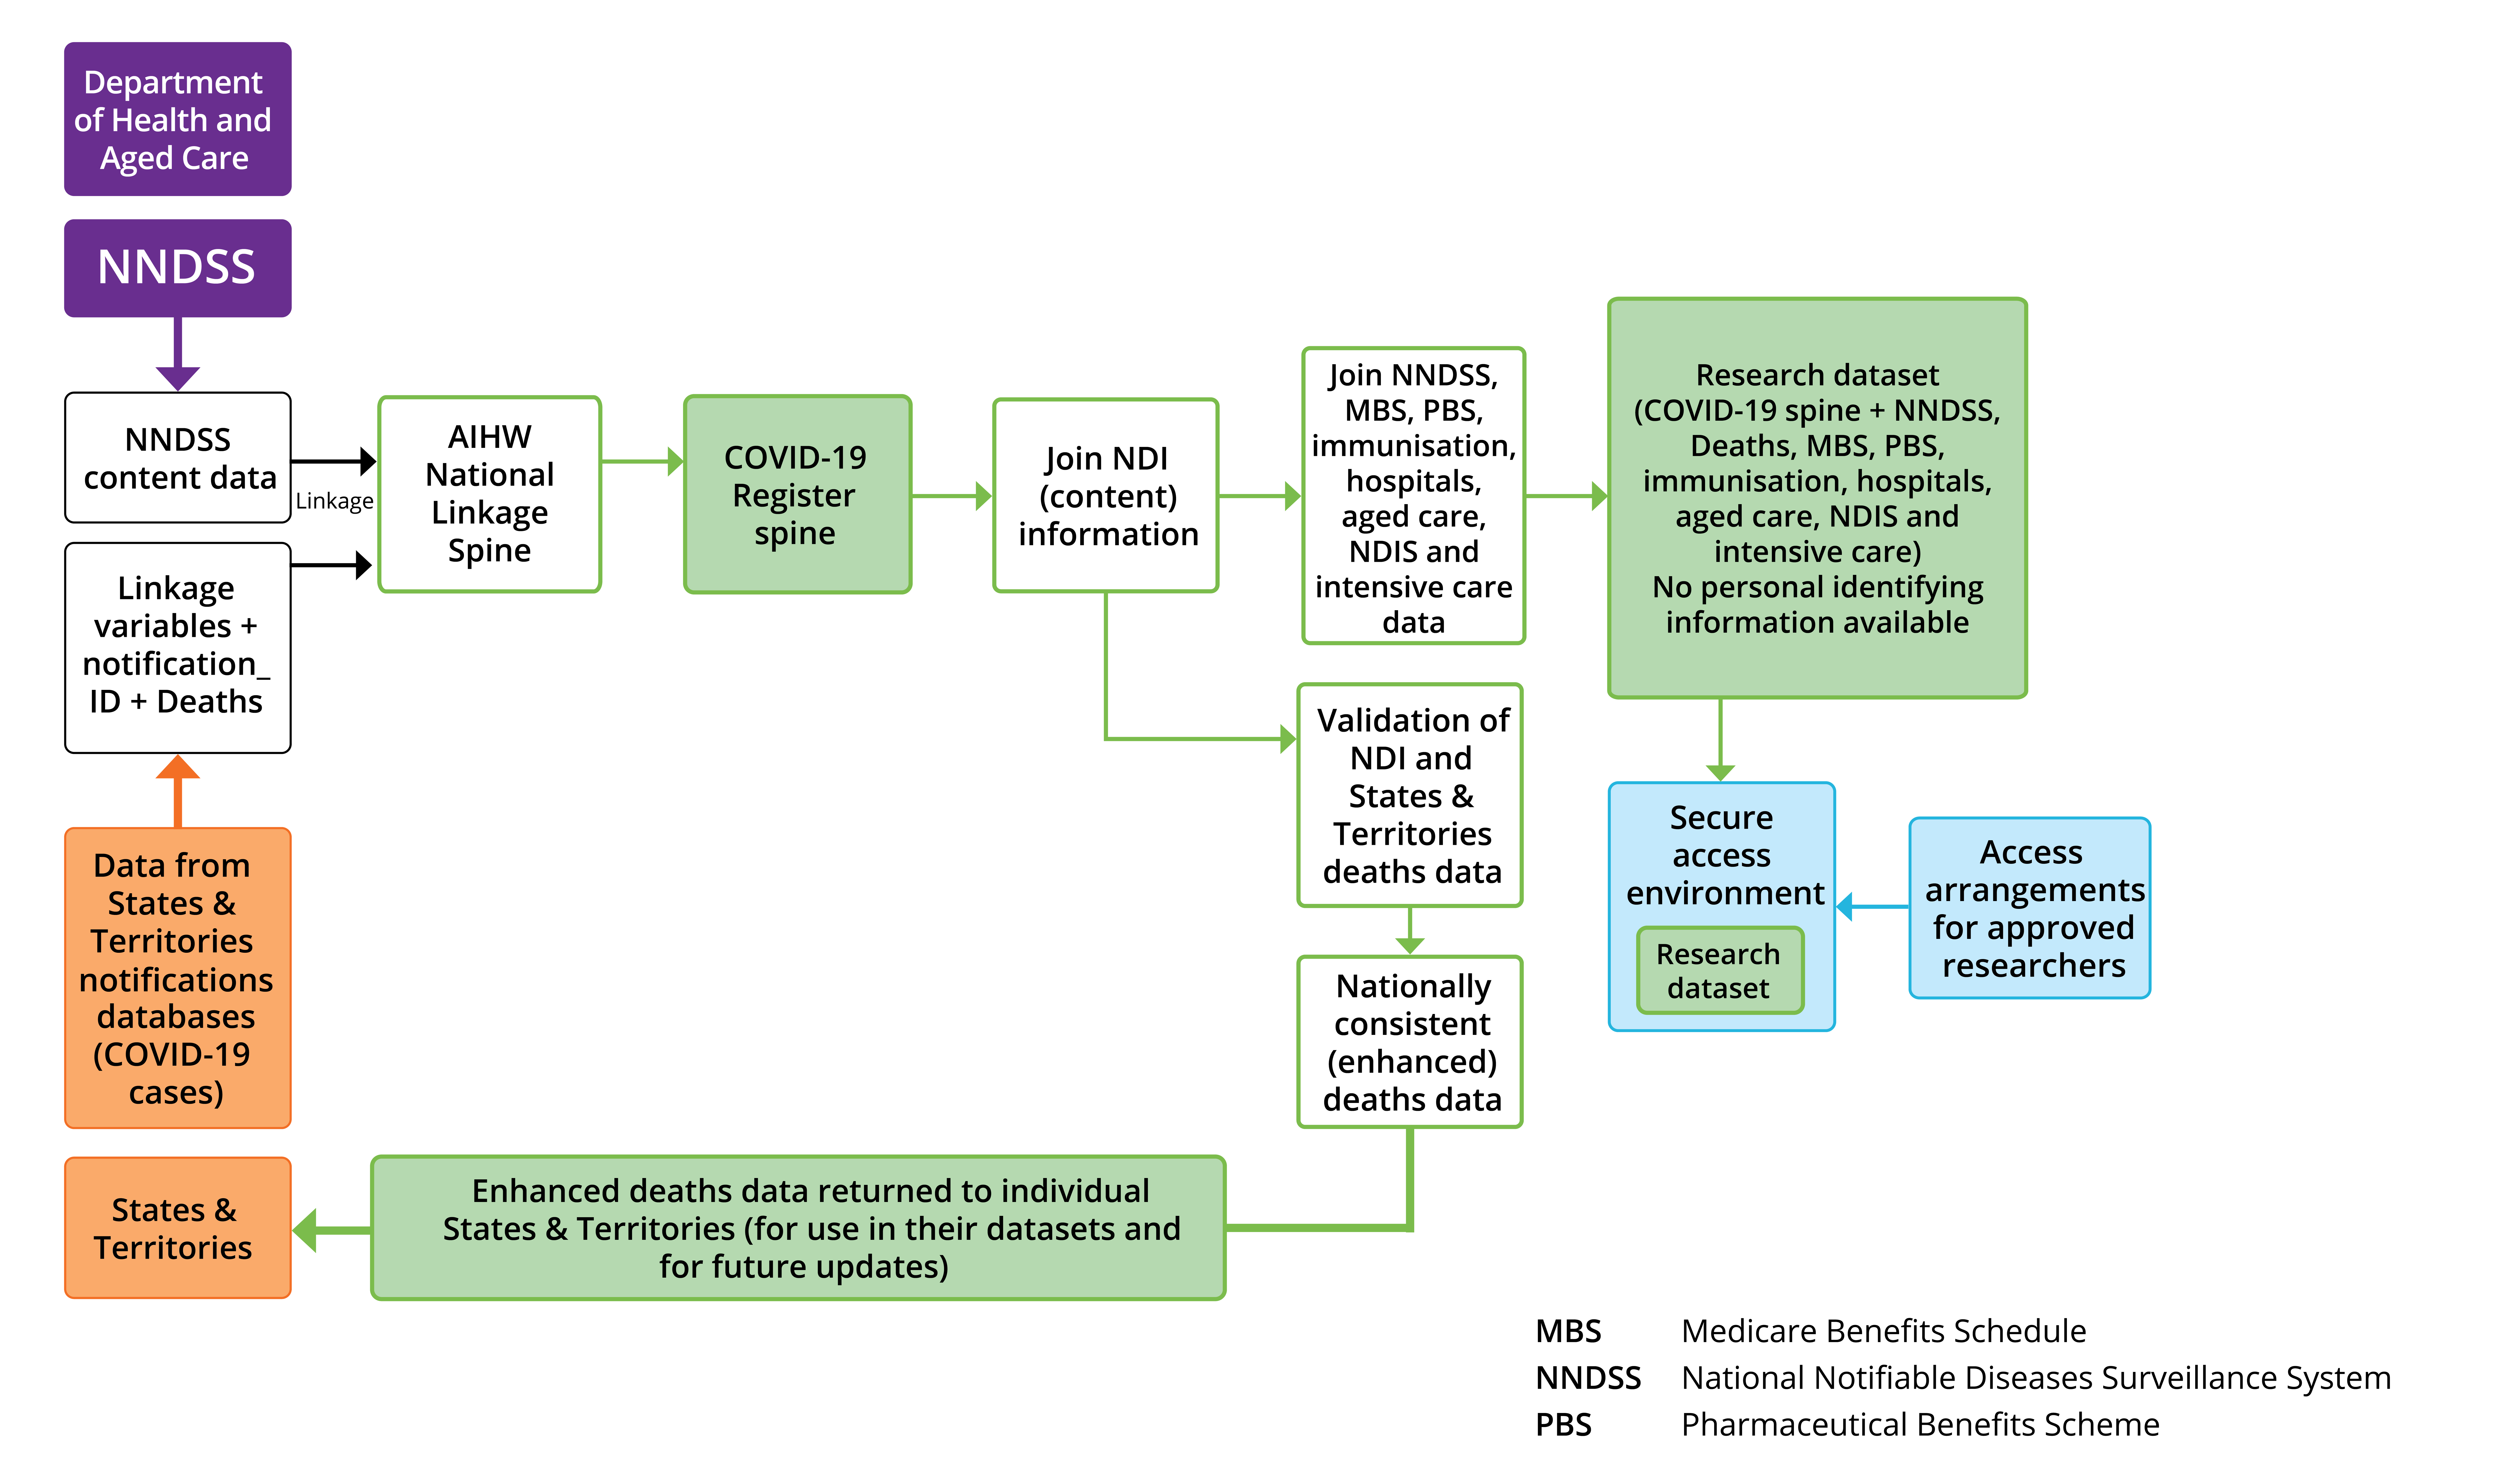 The flowchart shows linkage of COVID-19 case information and different datasets to create the de-identified COVID-19 Register. 